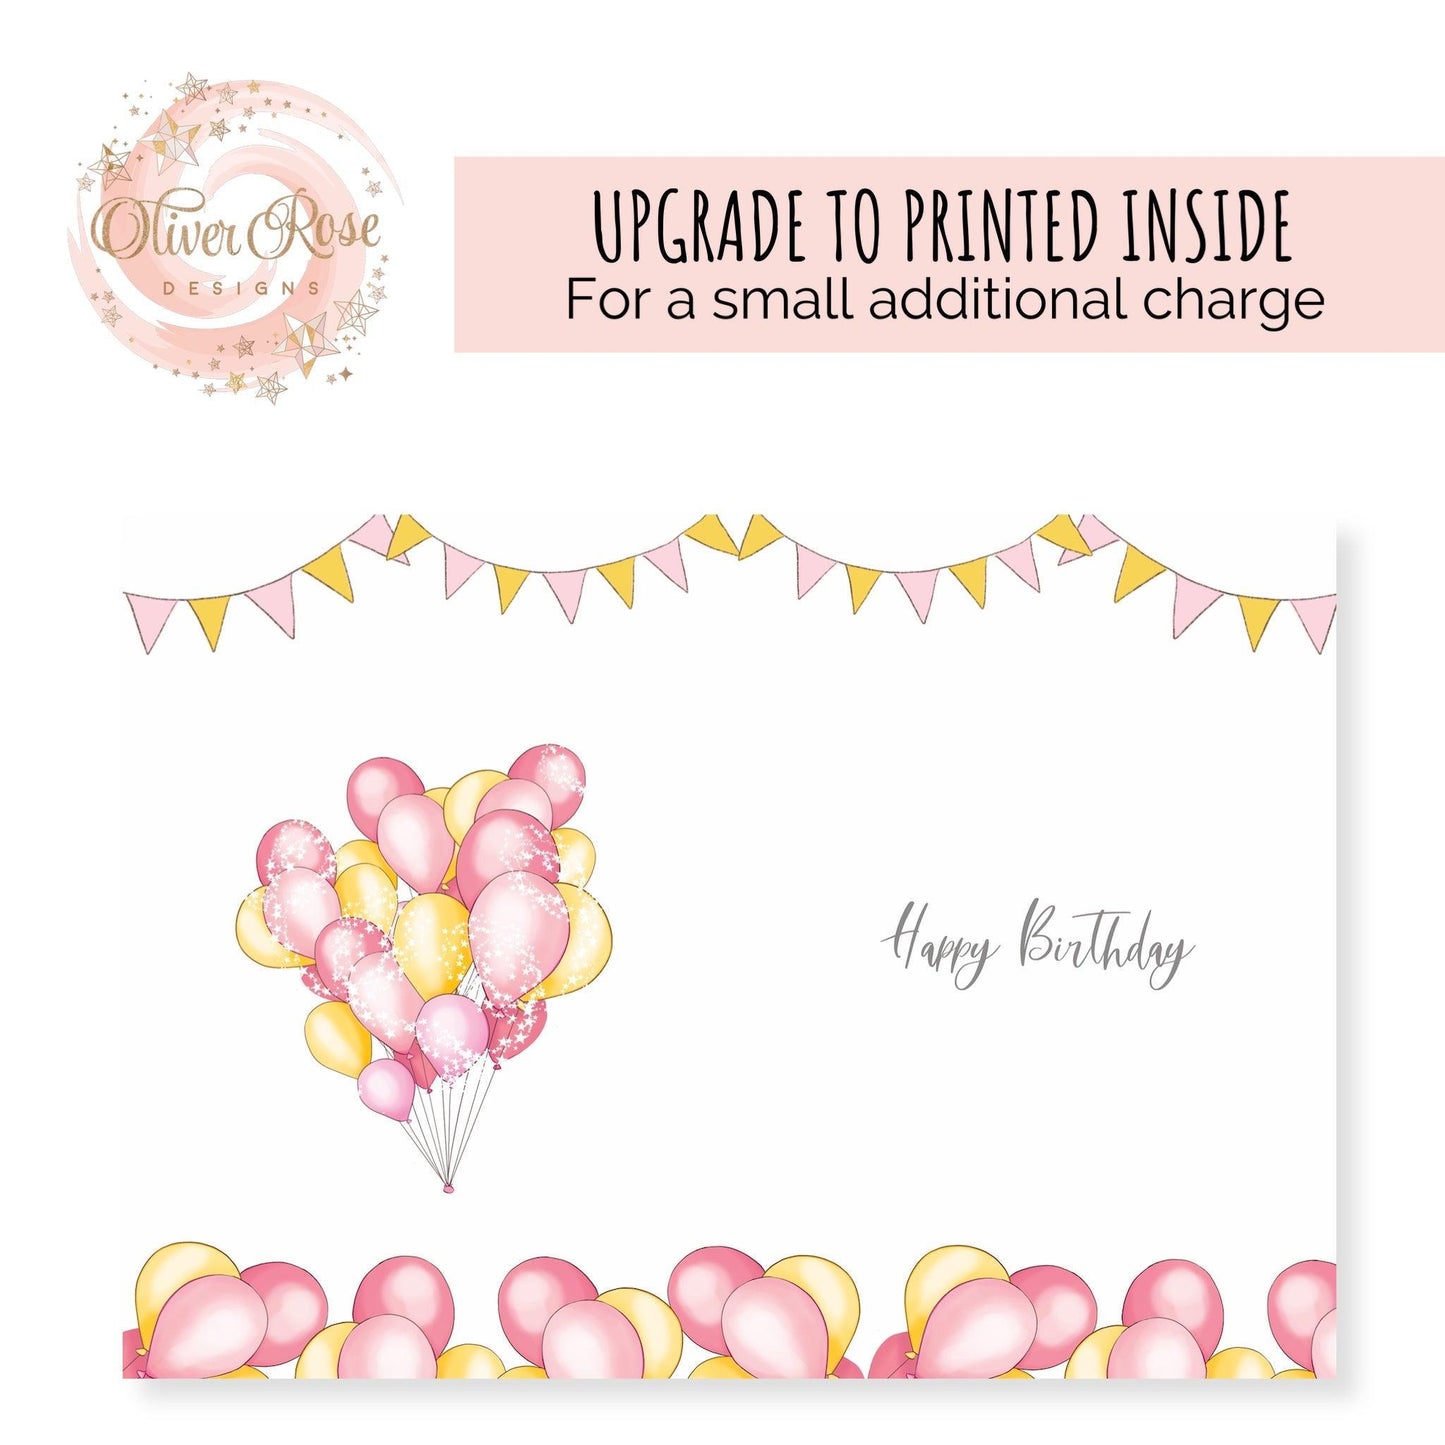 Pink & Yellow Birthday Card Printed Inside Design Upgrade, Happy Birthday (Small Additional Charge) OLIVER ROSE DESIGNS